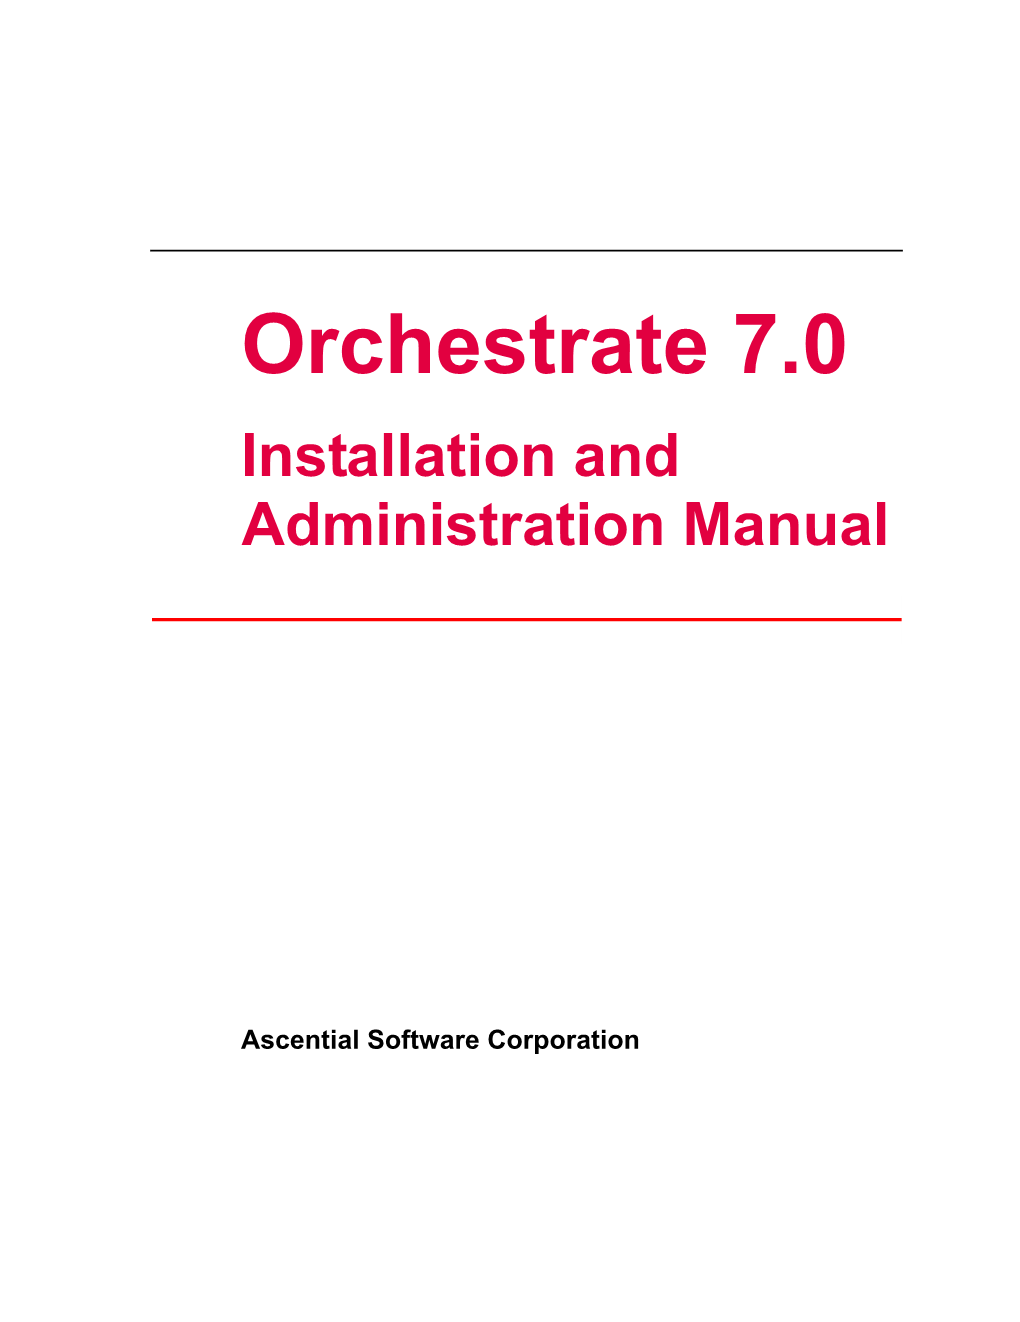 Orchestrate 7.0 Installation and Administration Manual